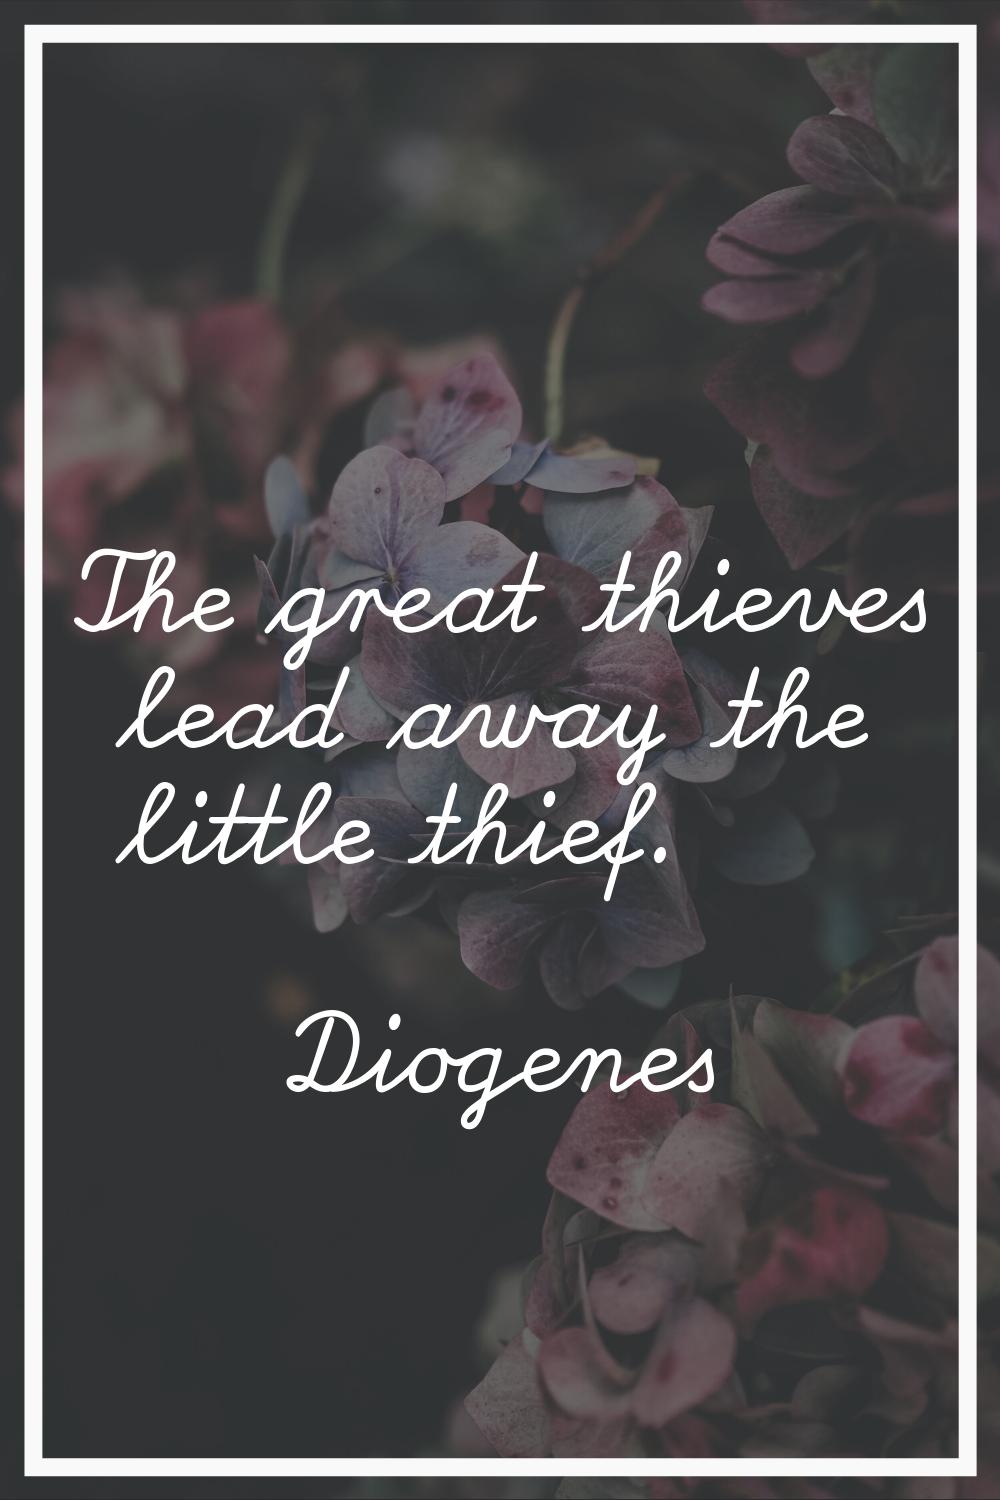 The great thieves lead away the little thief.